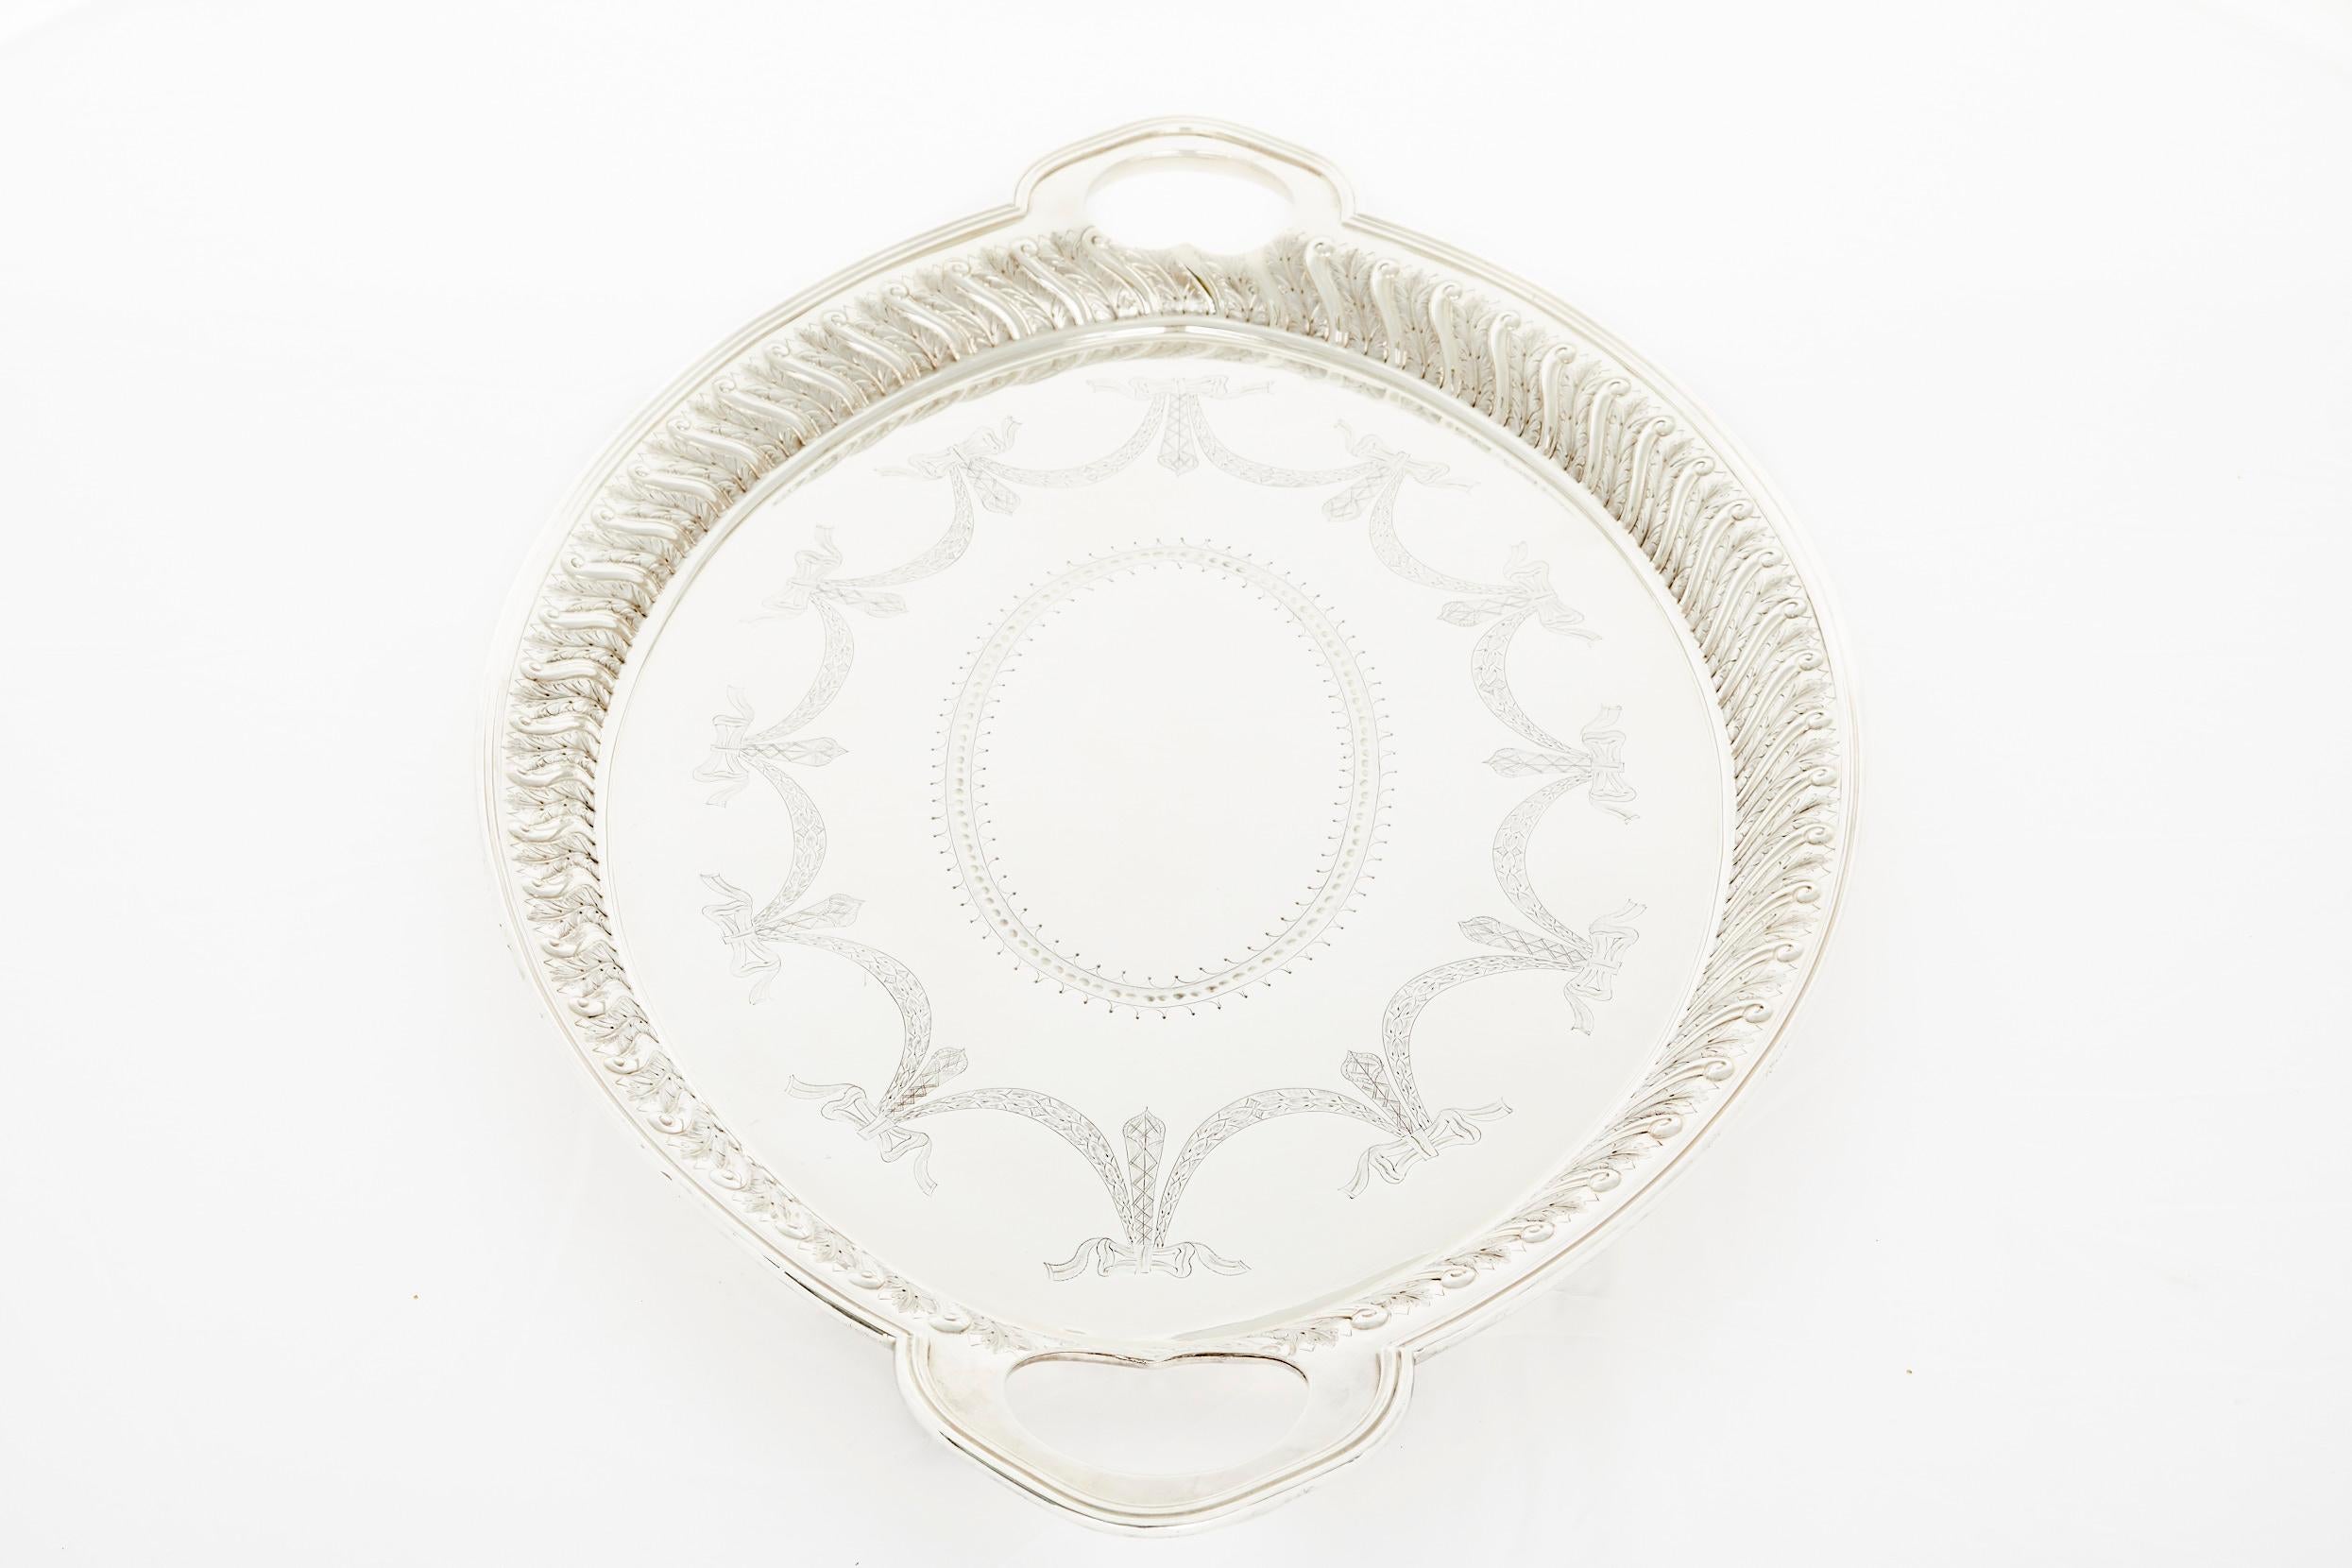 Large and heavy, Edwardian style, Silver plated barware / tableware serving Tray. The tray features flat chased interior and exterior floral, scroll decoration to the body with a shaped shell and gadroon border, and an engraved crest and two side